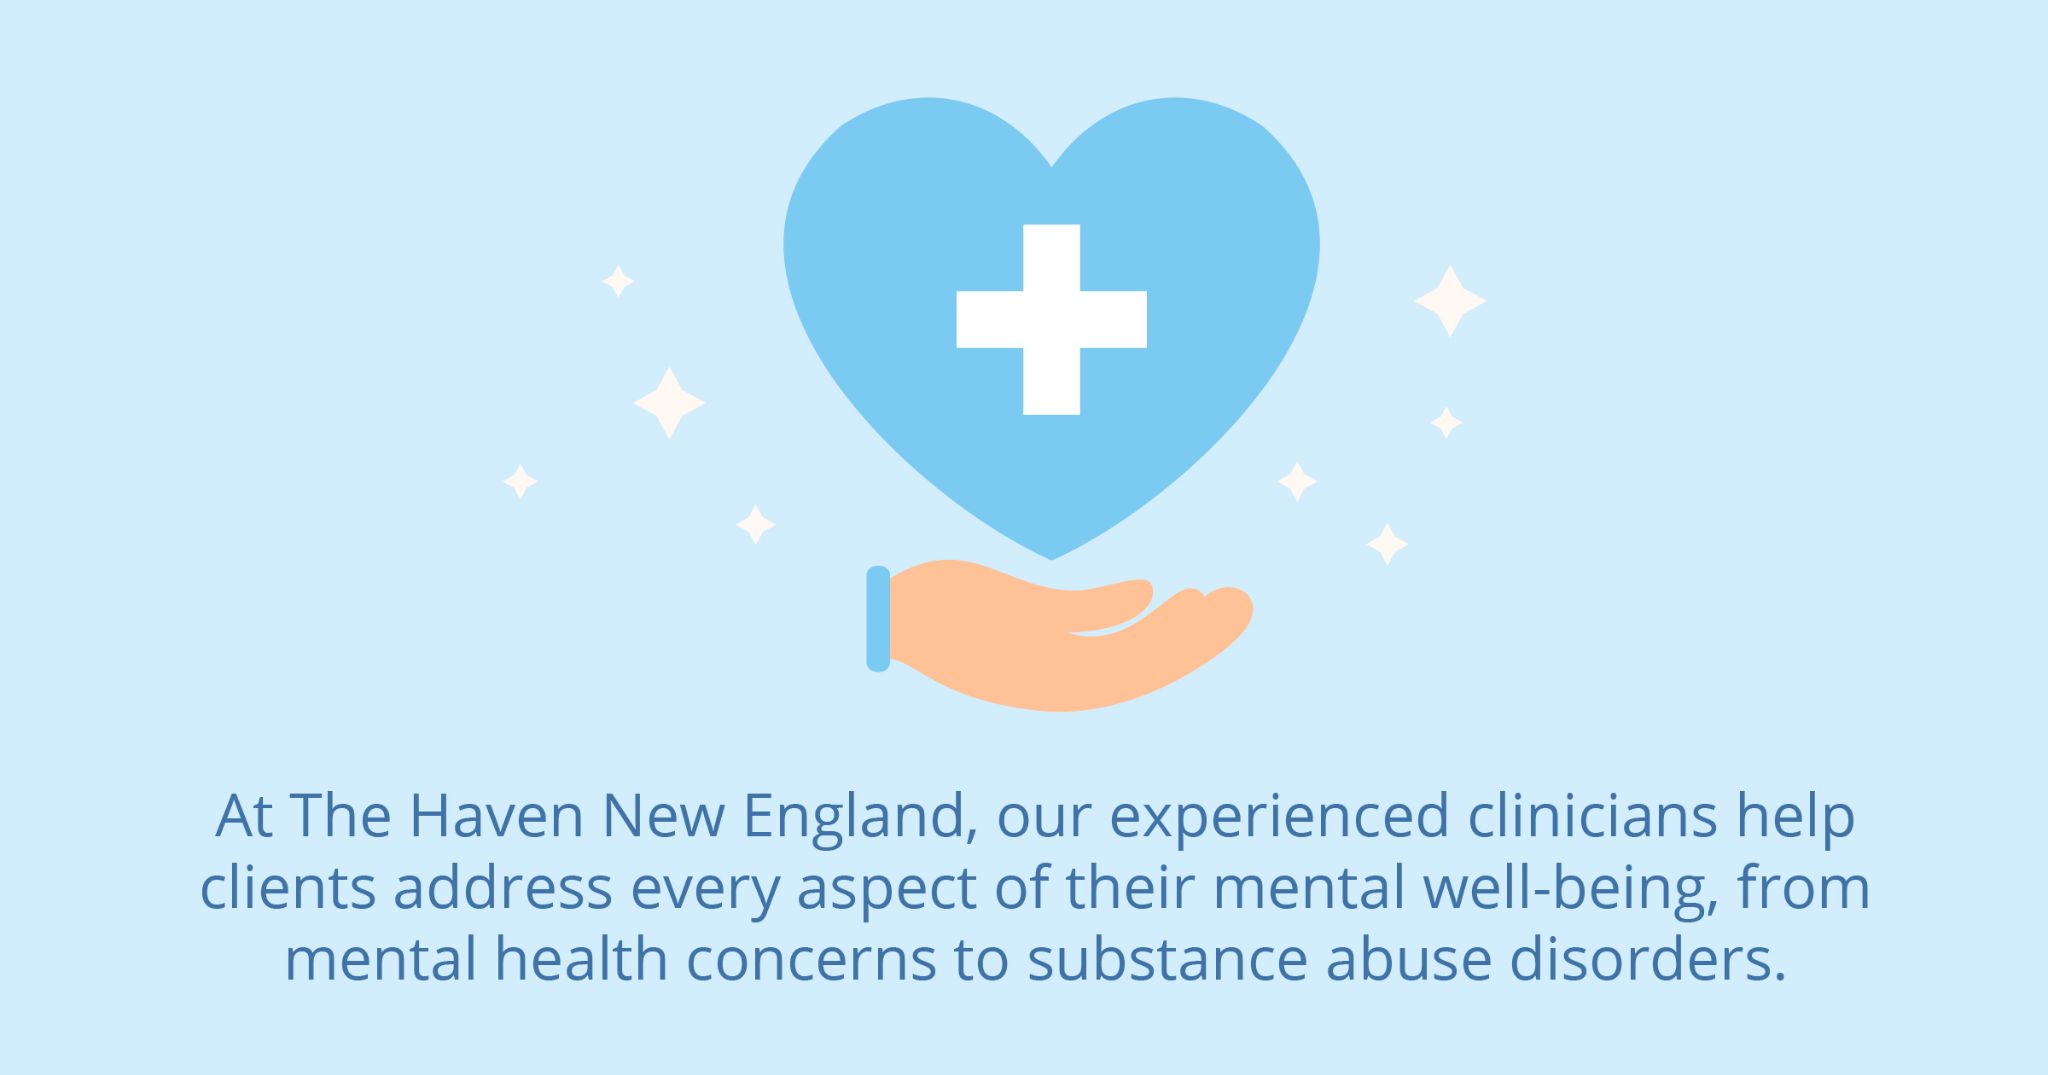 At the Haven New England, our experienced clinicians help clients address every aspect of their mental well-being, from mental health concerns to substance abuse disorders.